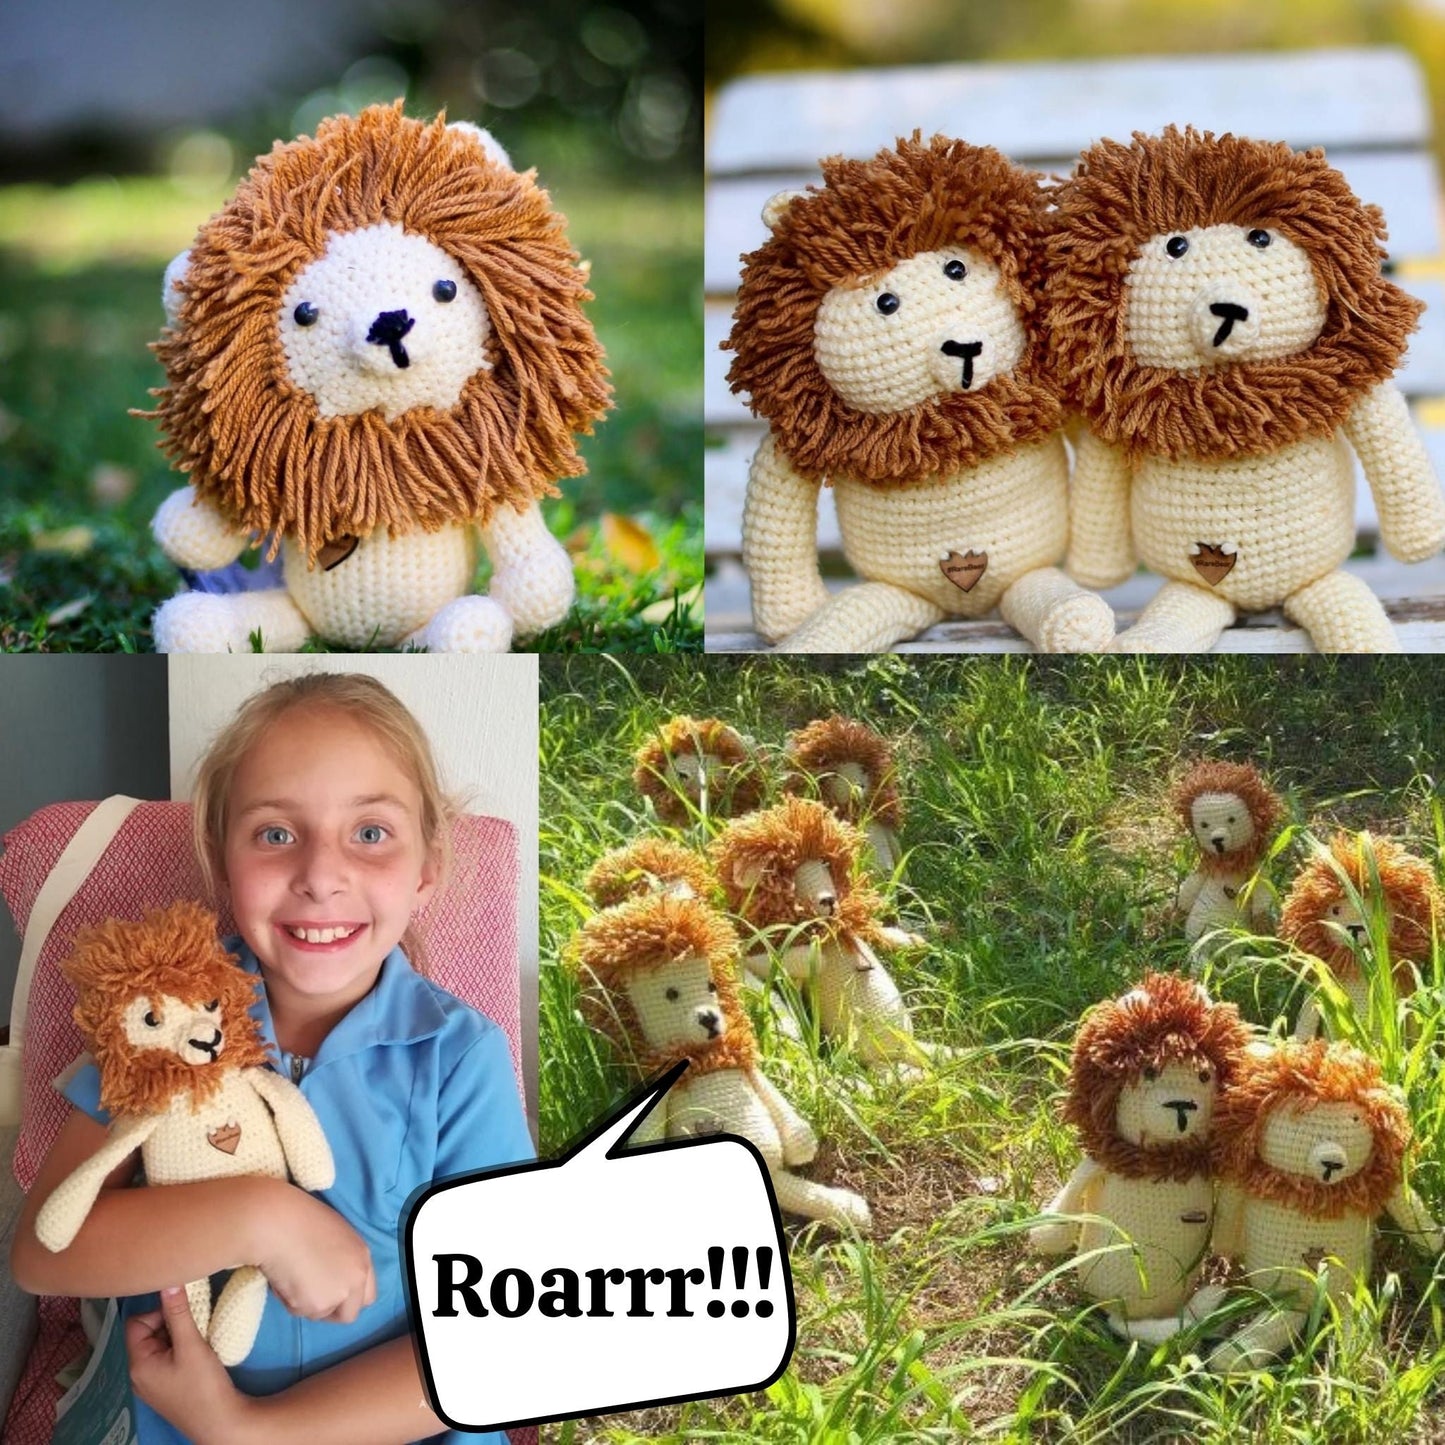 Lion - Handmade in South Africa by the ladies from Rare Bears Charity